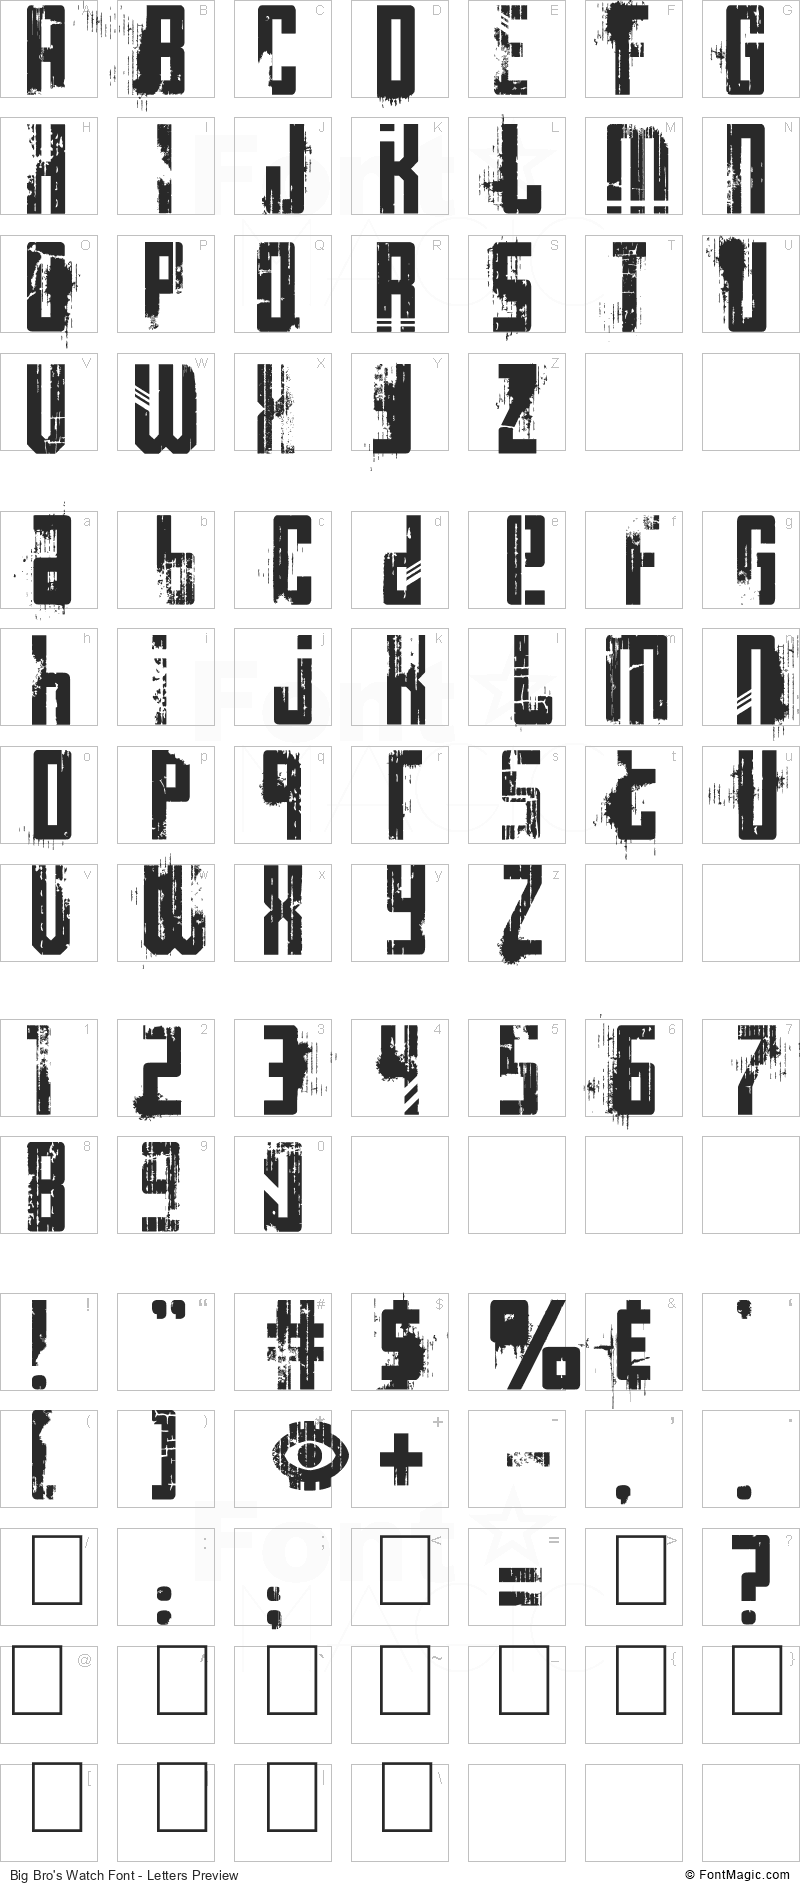 Big Bro’s Watch Font - All Latters Preview Chart